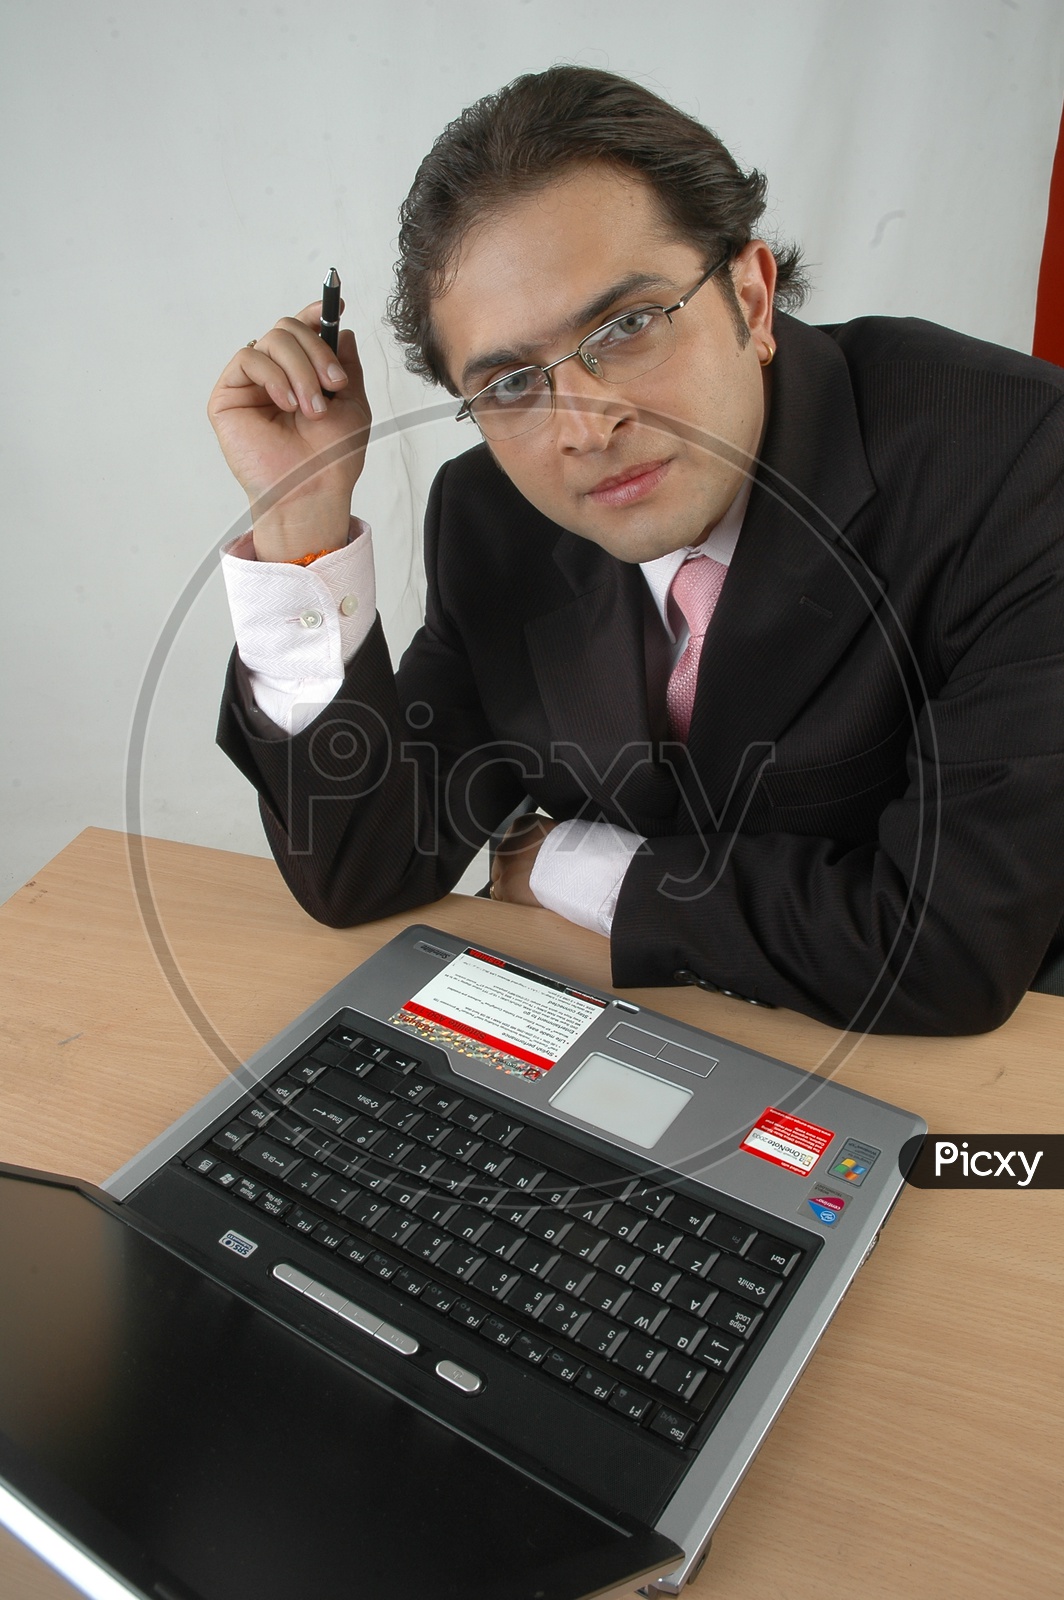 Indian man working and thinking infront of a laptop